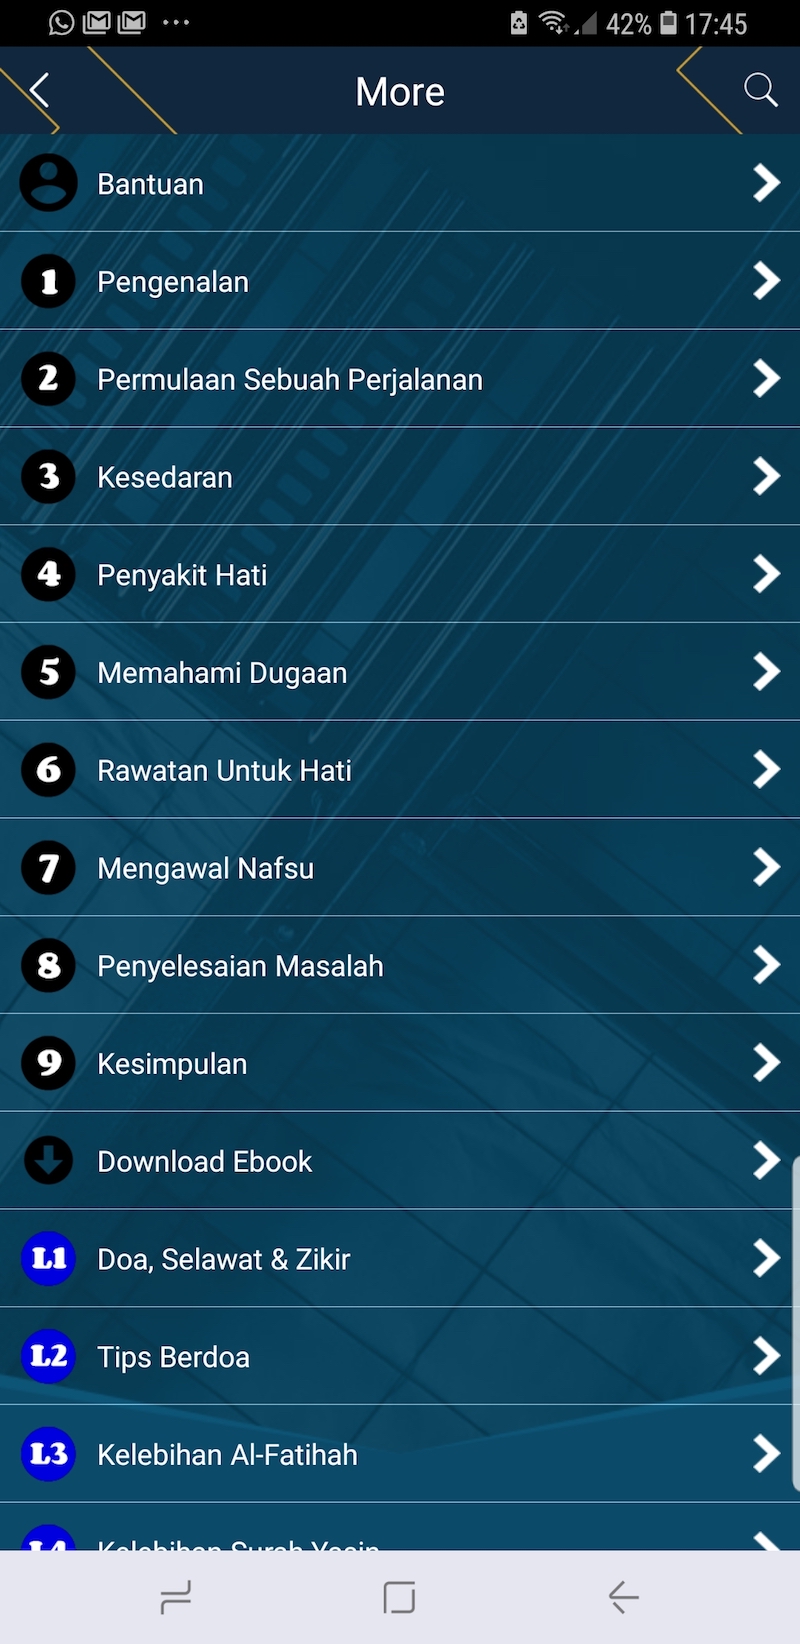 The options menu for the Jakim-endorsed app.